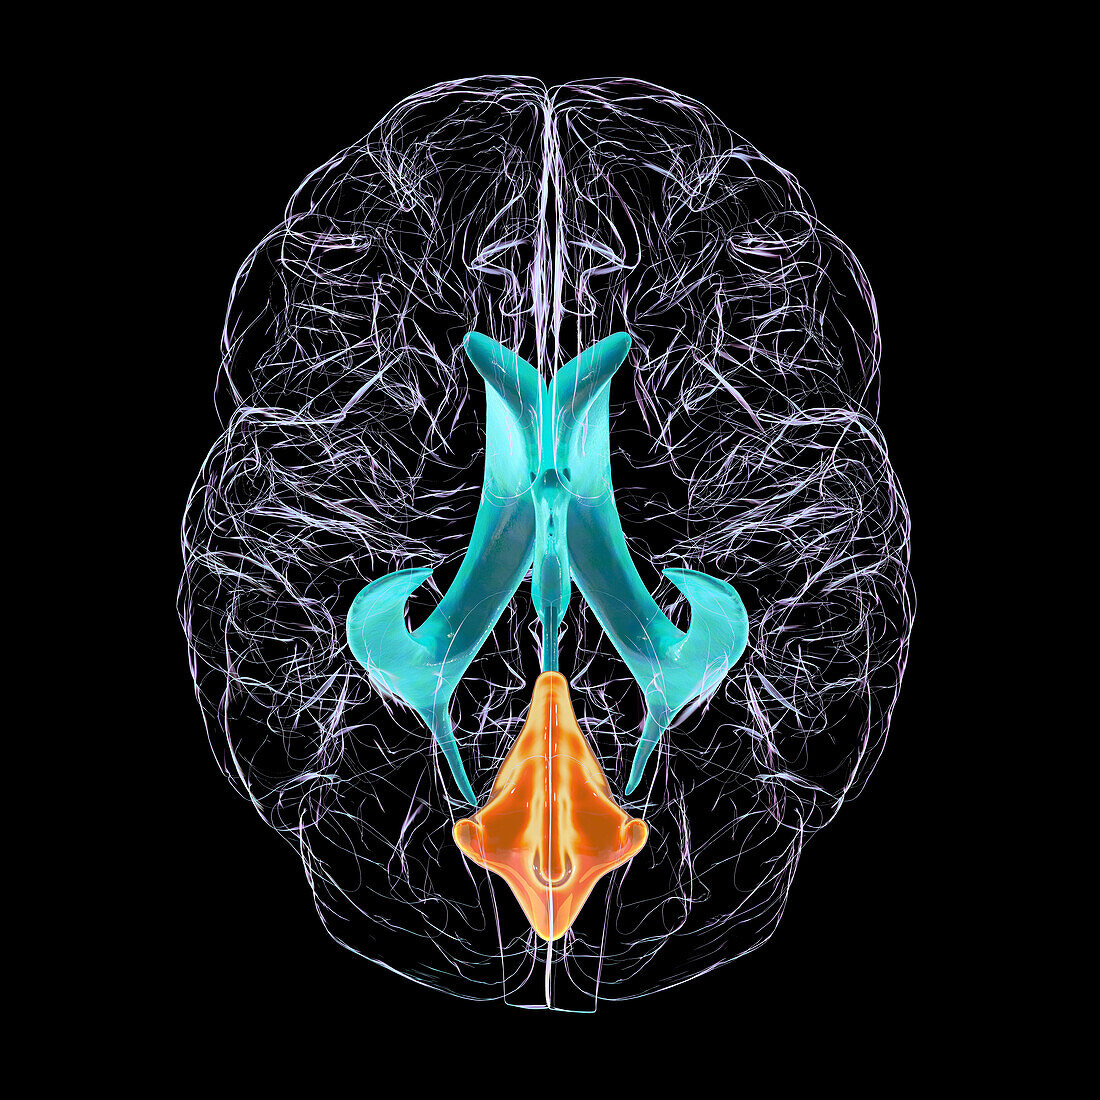 Enlarged fourth ventricle of the brain, illustration